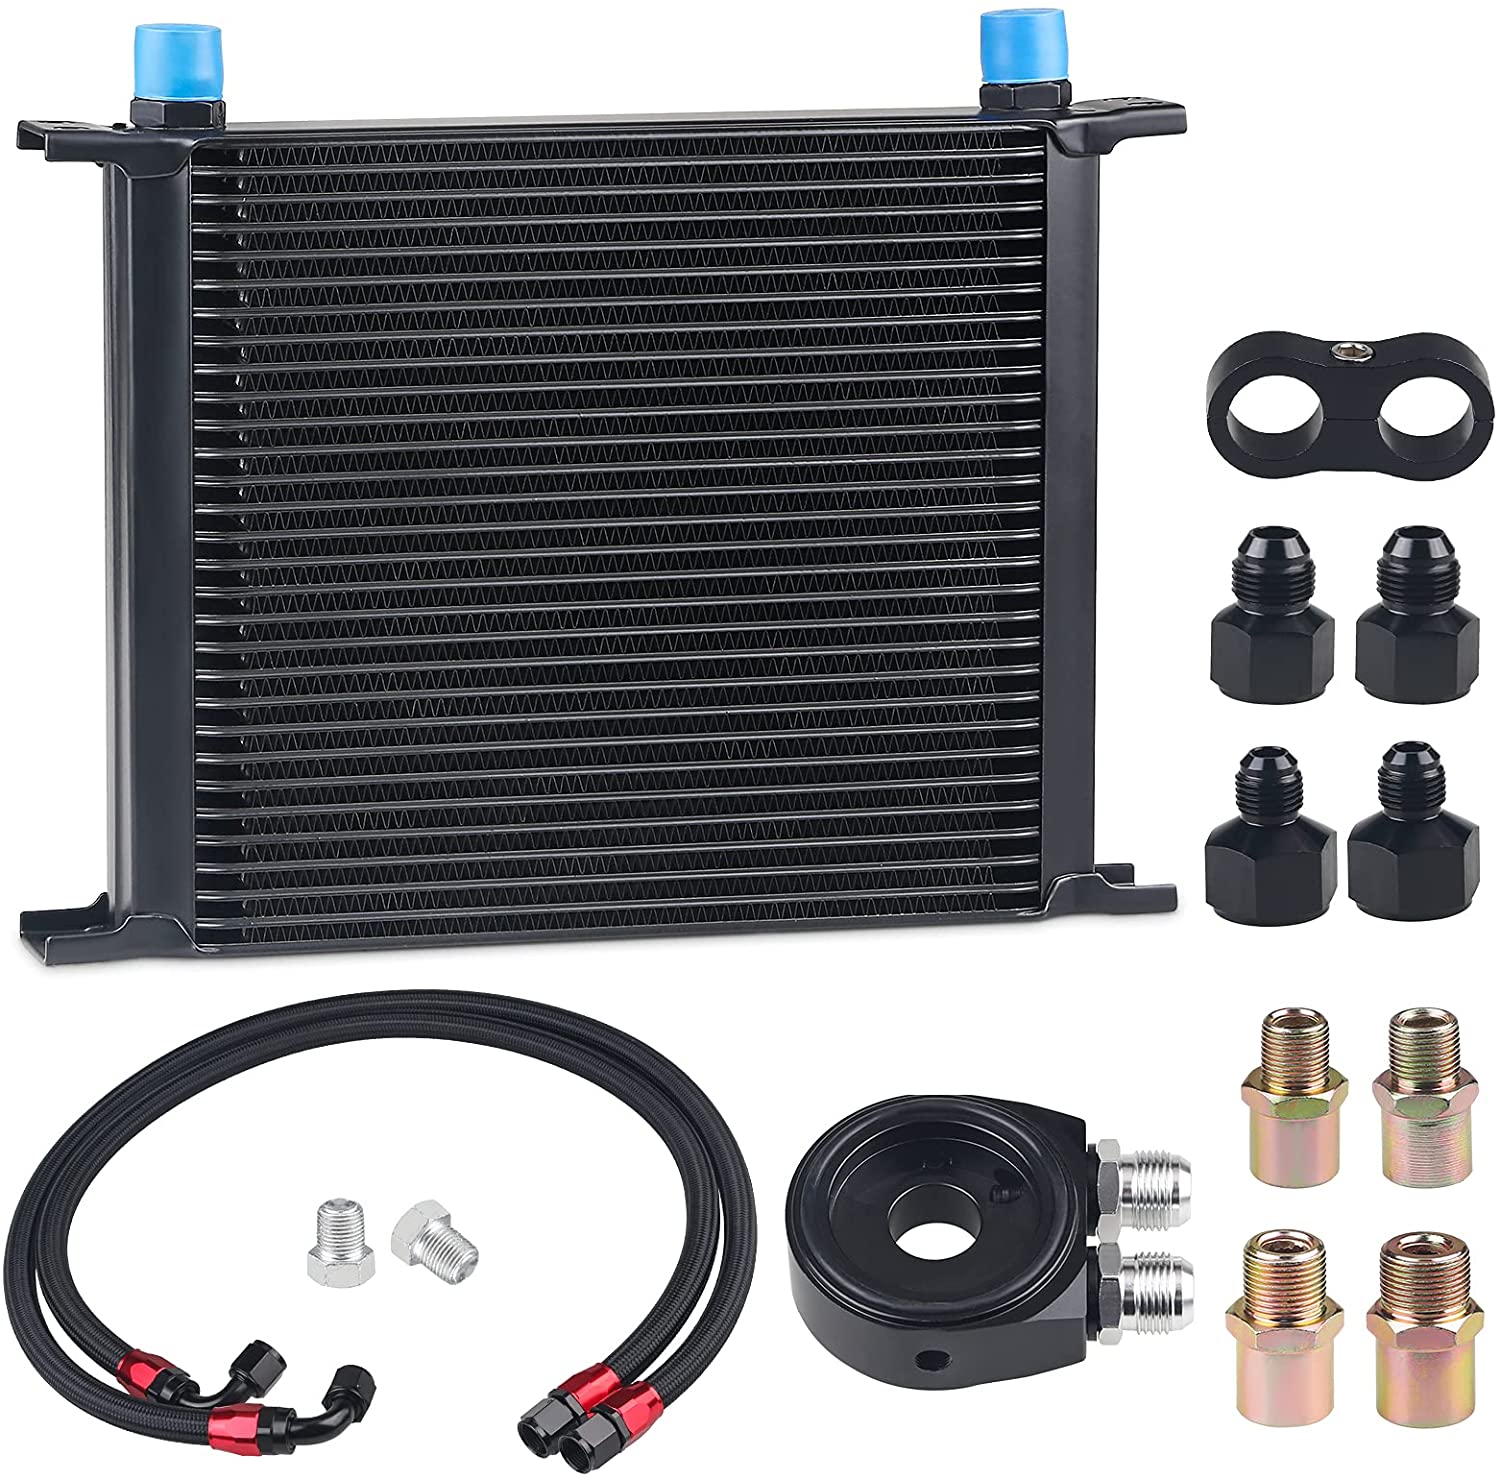 How to choose Oil Cooler Kit?